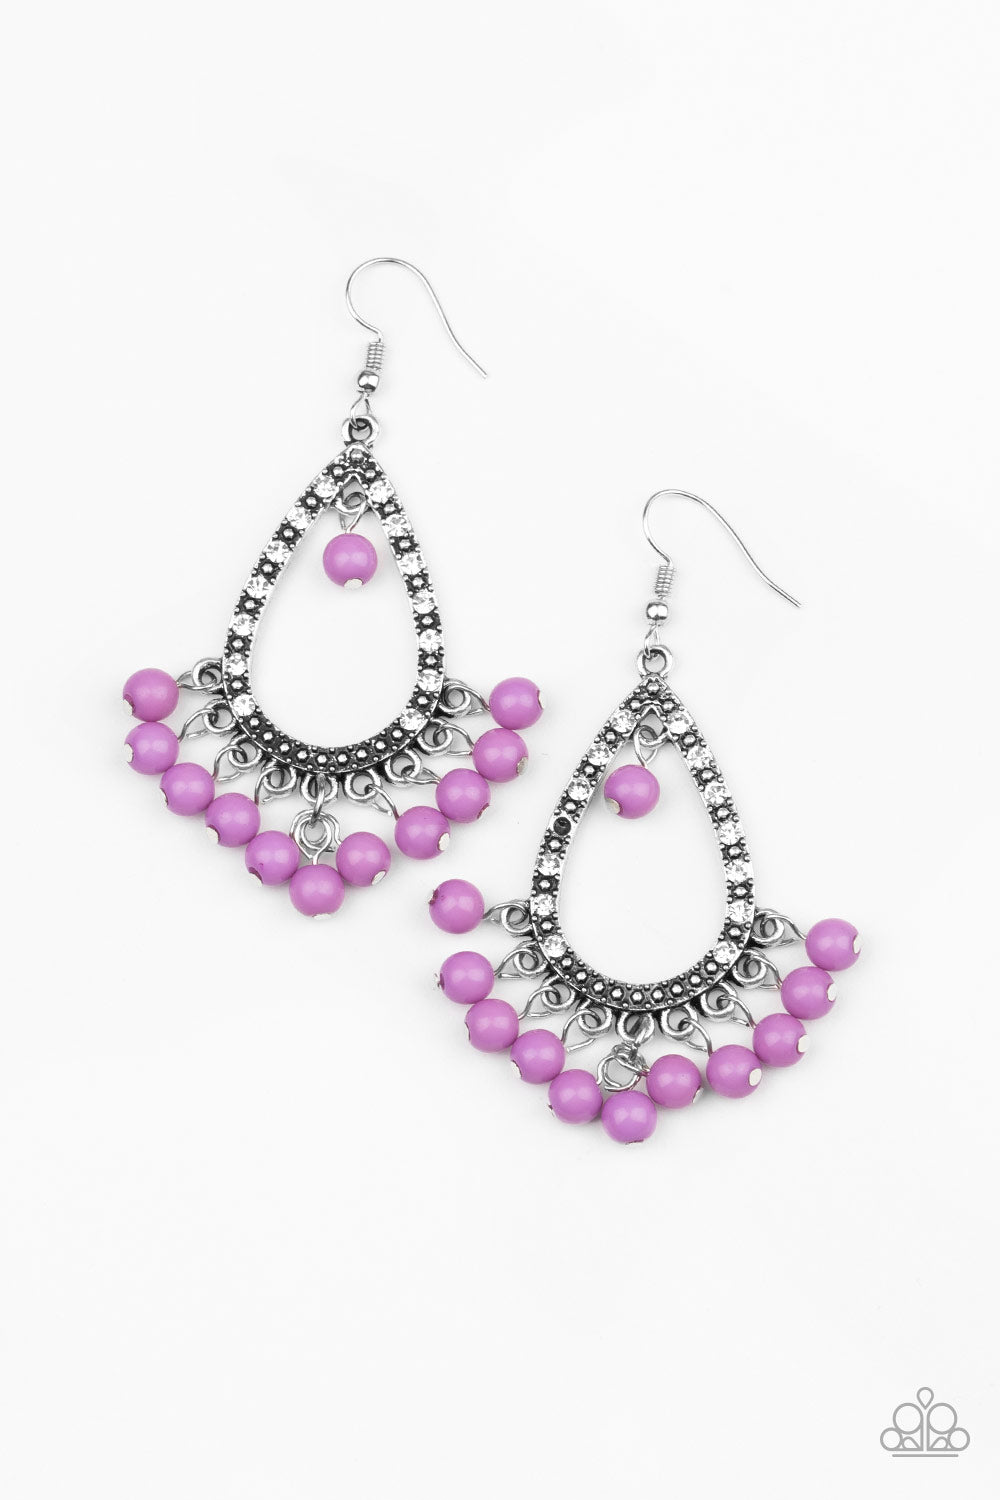 five-dollar-jewelry-positively-prismatic-purple-earrings-paparazzi-accessories